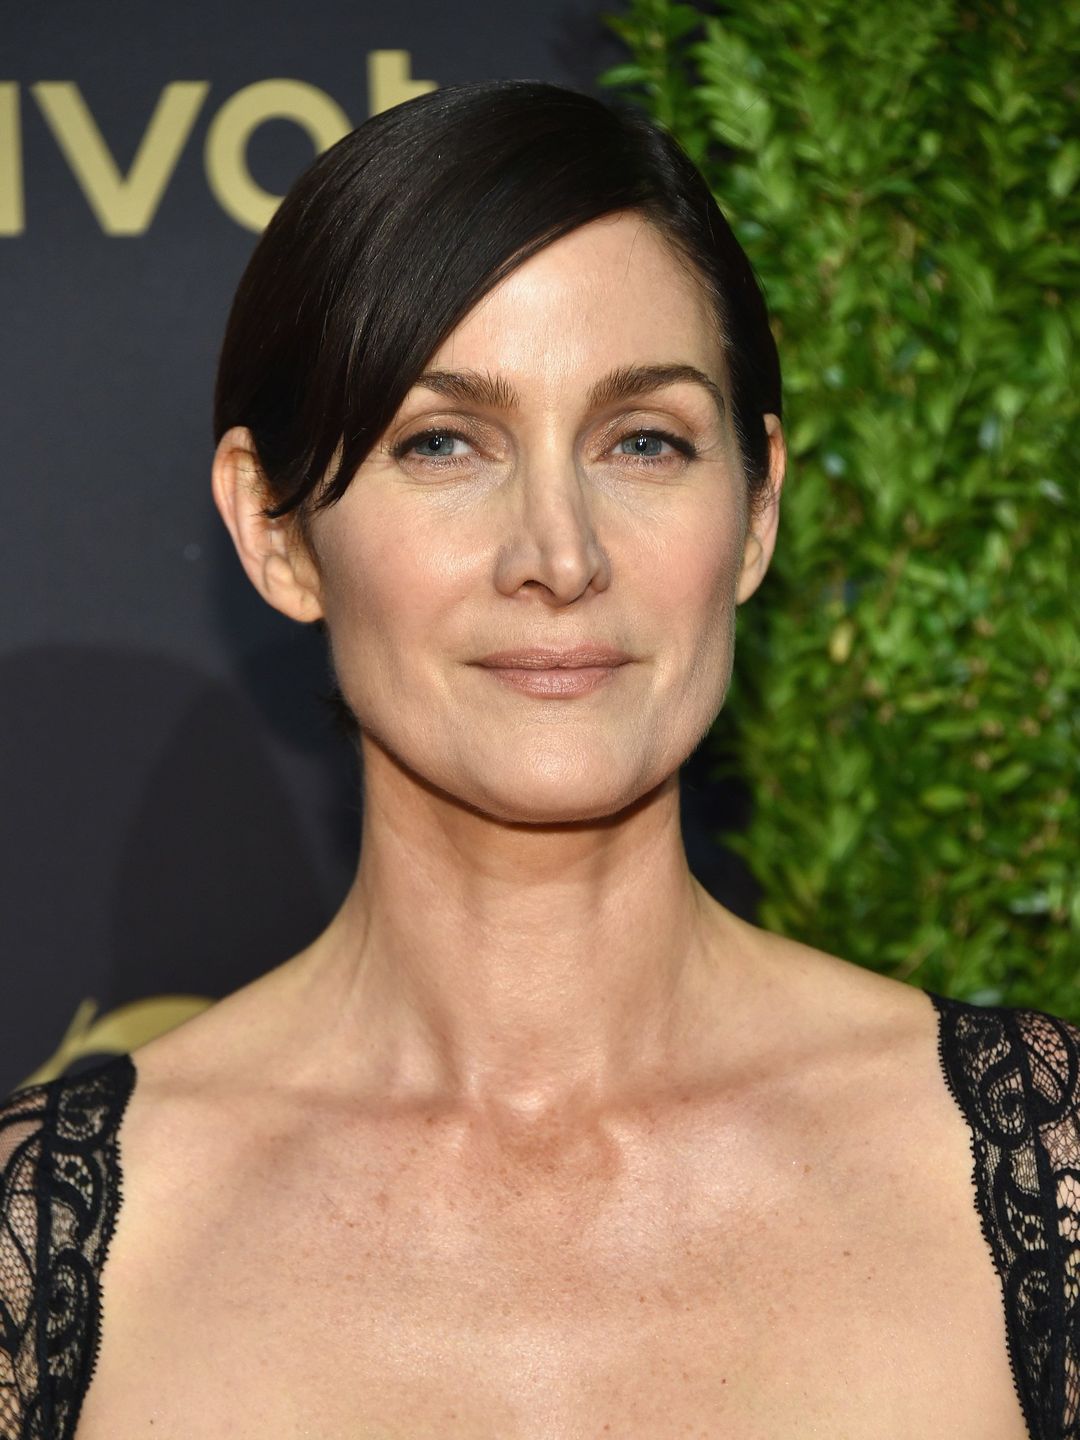 Carrie-Anne Moss upbringing